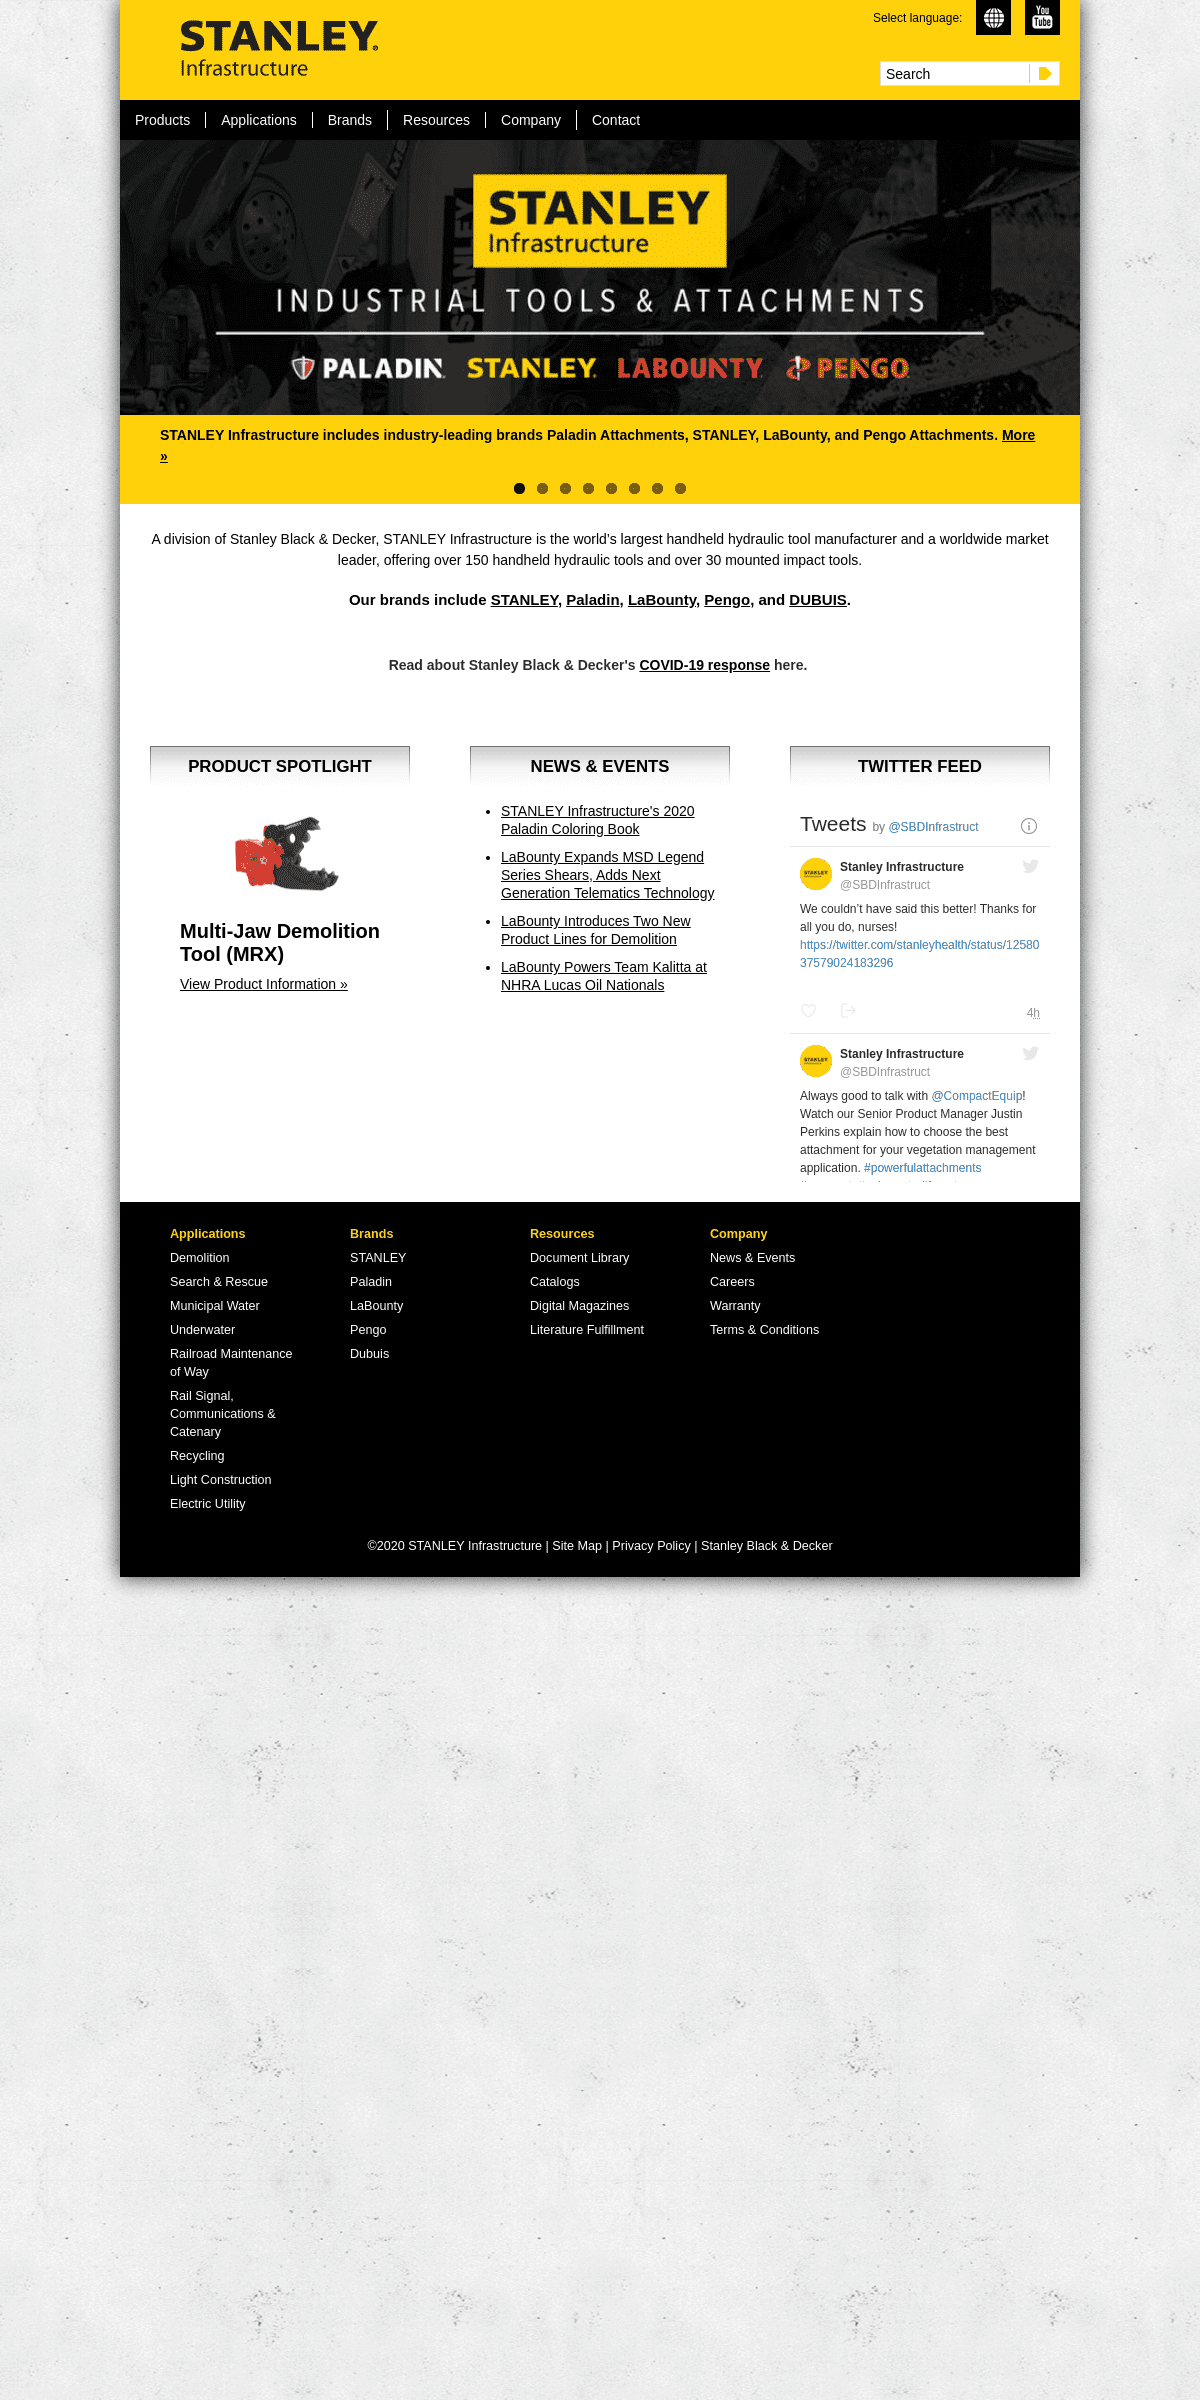 A complete backup of stanleyinfrastructure.com